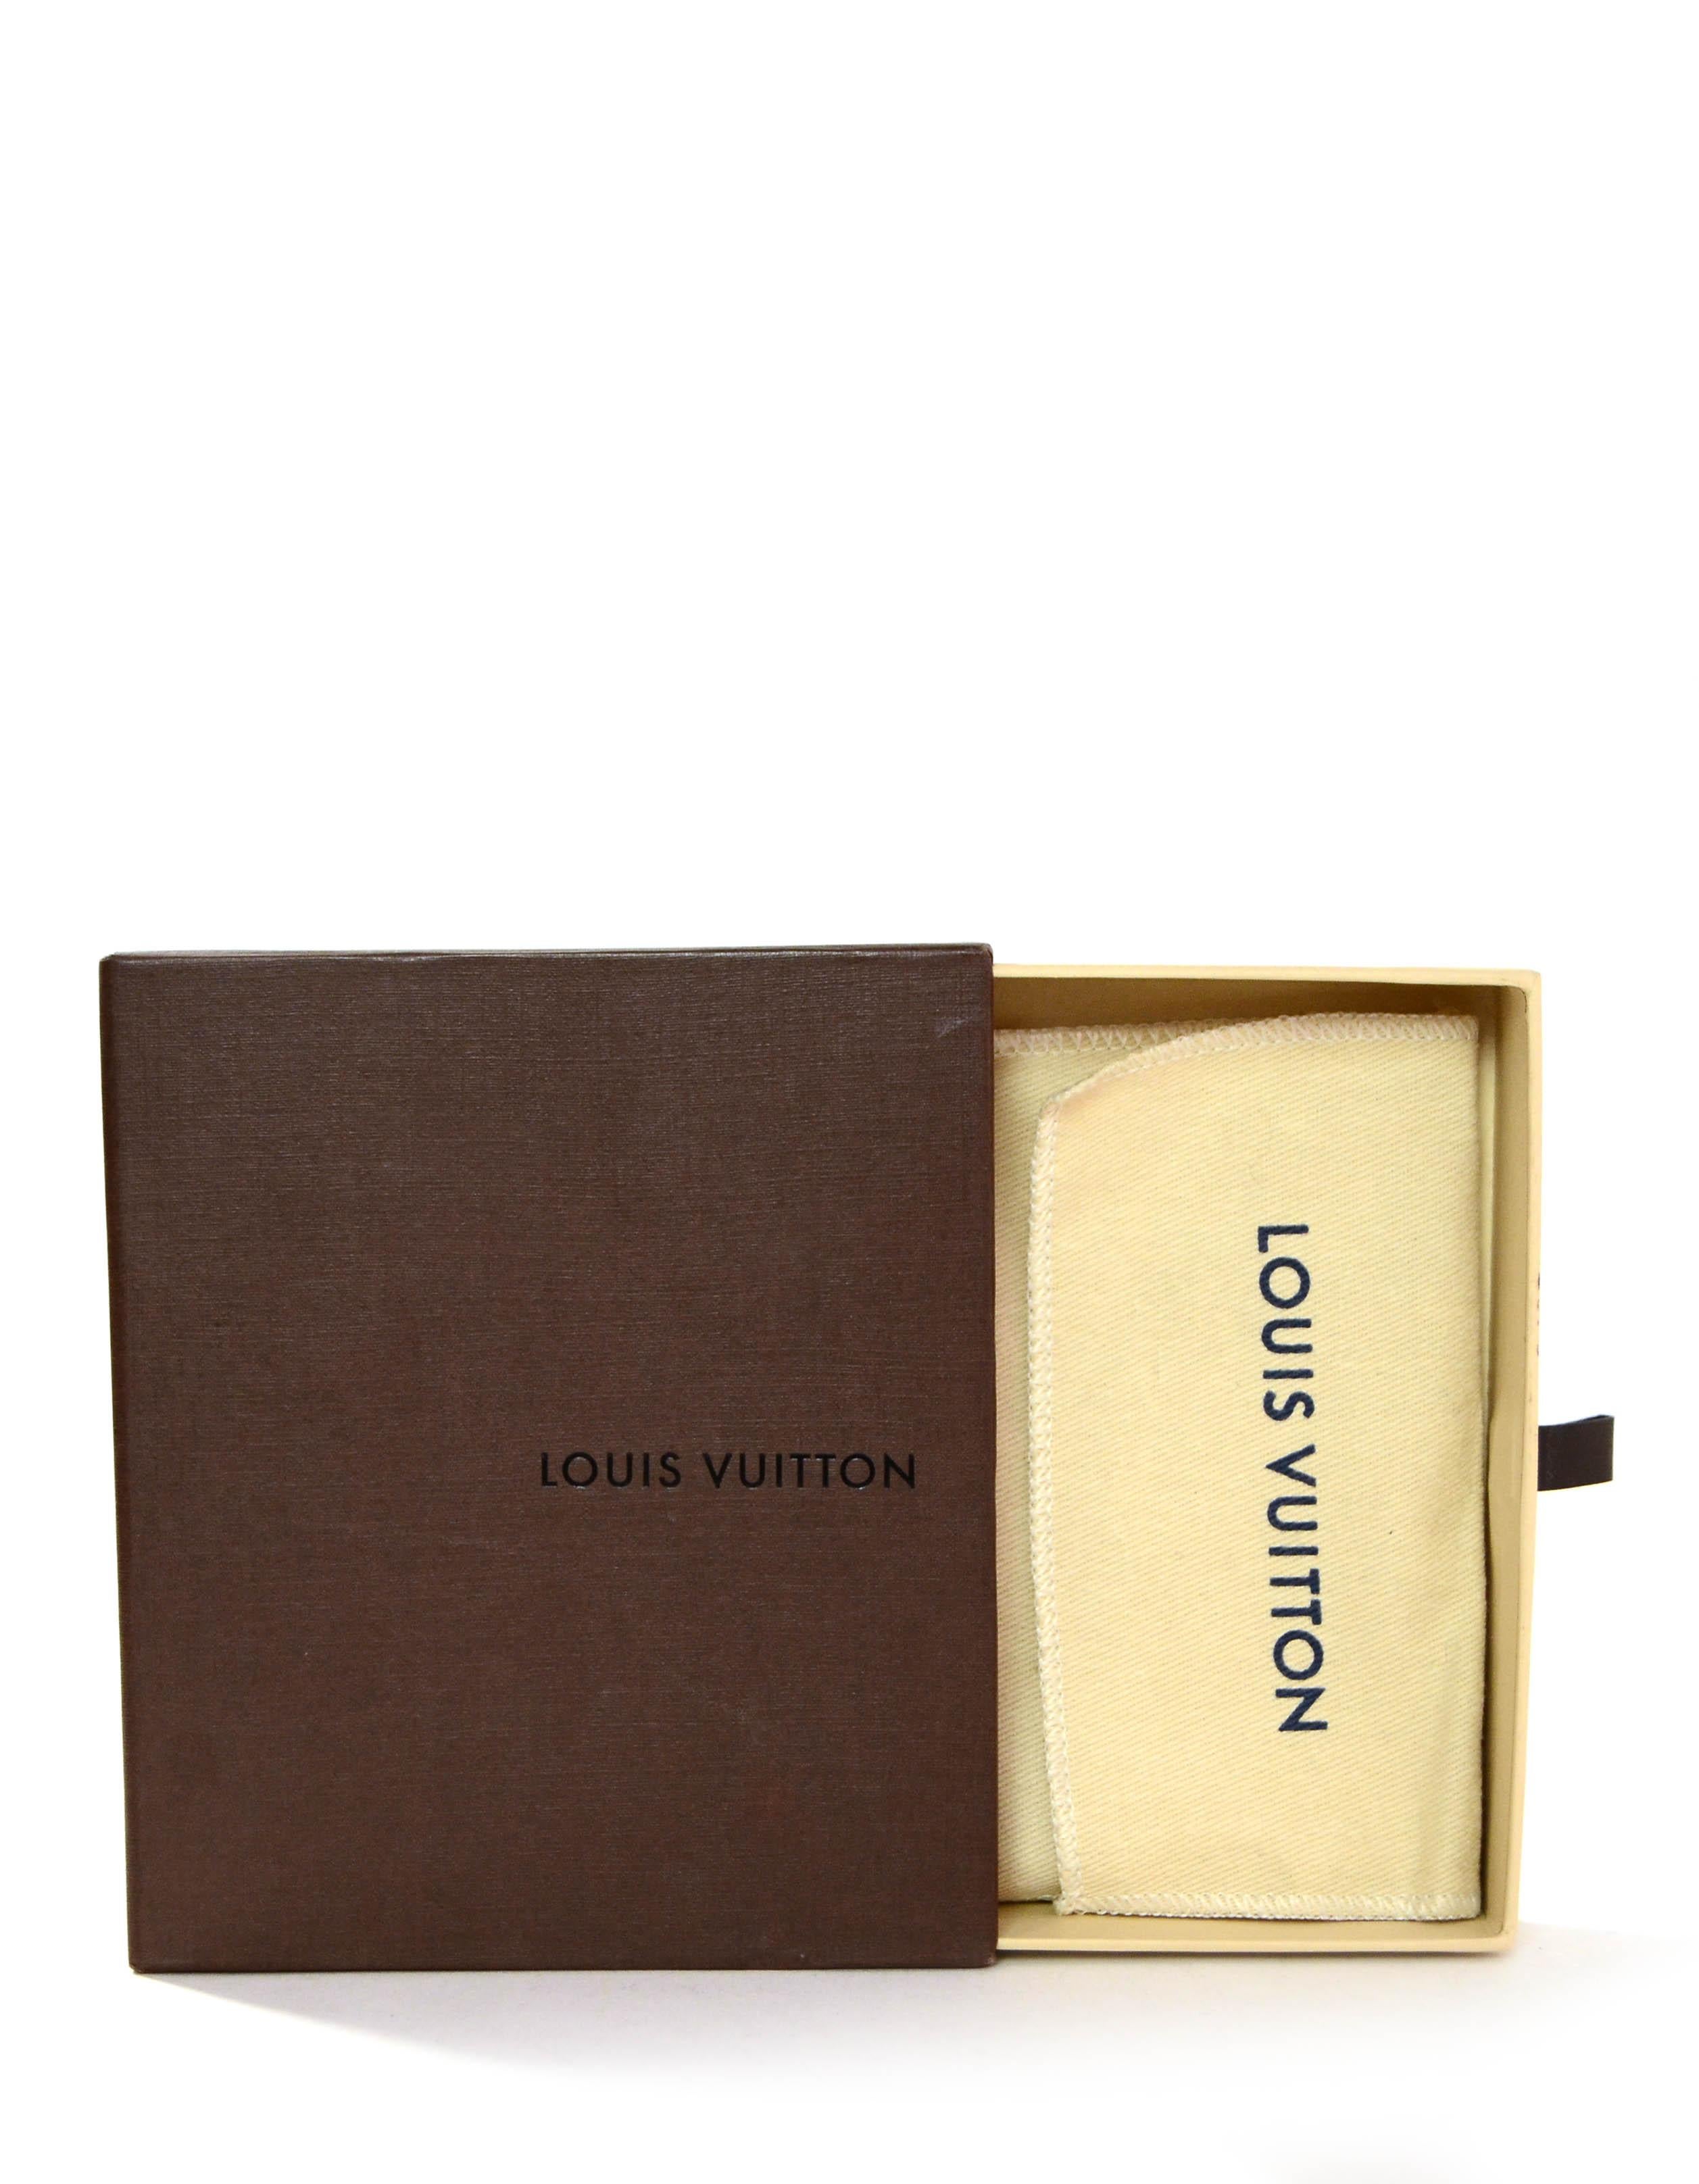 Louis Vuitton Monogram Key Pouch/ Coin Purse

Made In: Spain
Color: Brown
Hardware: Goldtone
Materials: Coated Canvas
Lining: Grained cow-hide leather
Closure/Opening: Zip top
Exterior Condition: Excellent
Interior Condition: Excellent 
Includes: